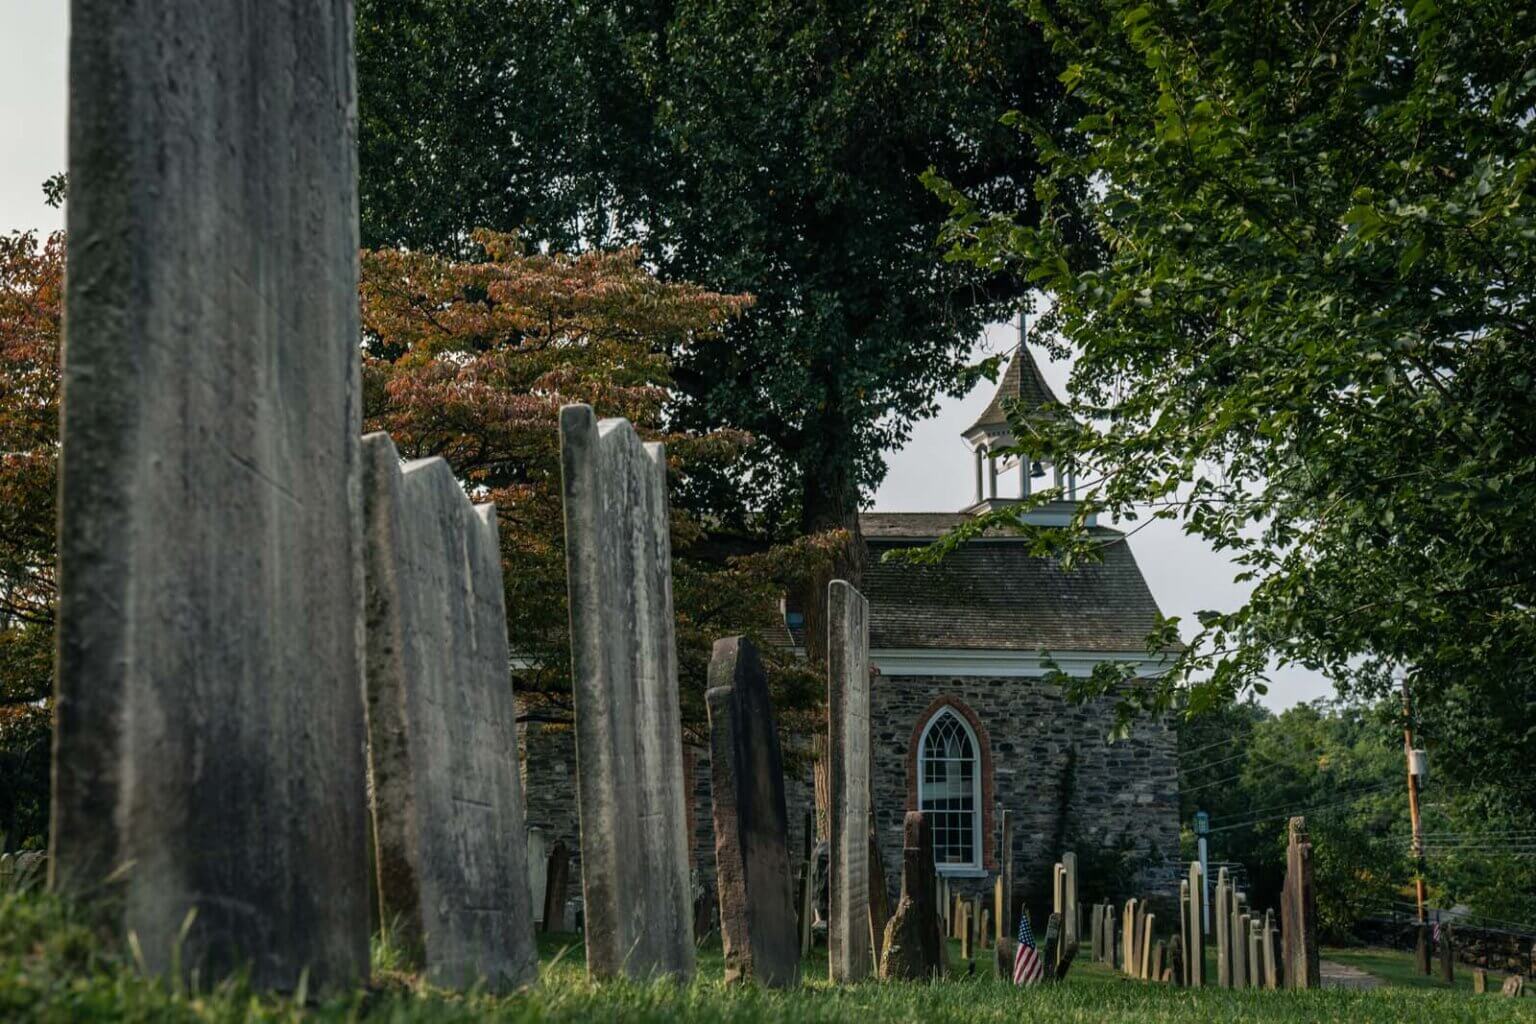 The Old Dutch Reformed Church in Sleepy Hollow